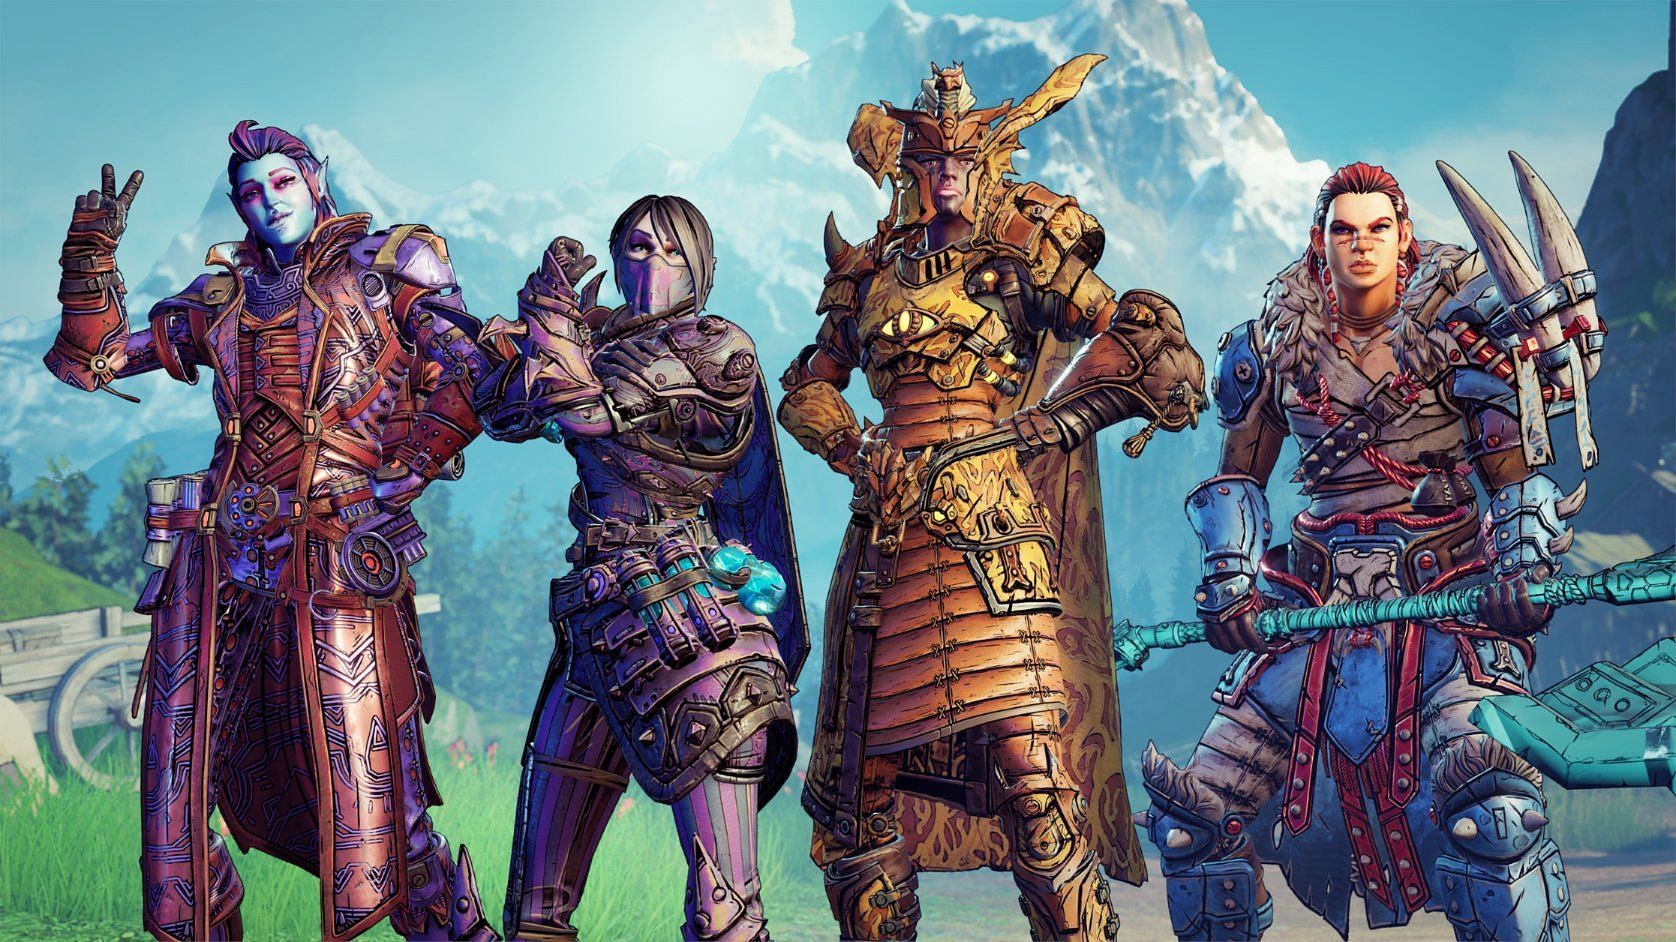 Up to four Fateakers can come together to save the Wonderlands from an ancient threat (Image via Gearbox Software)